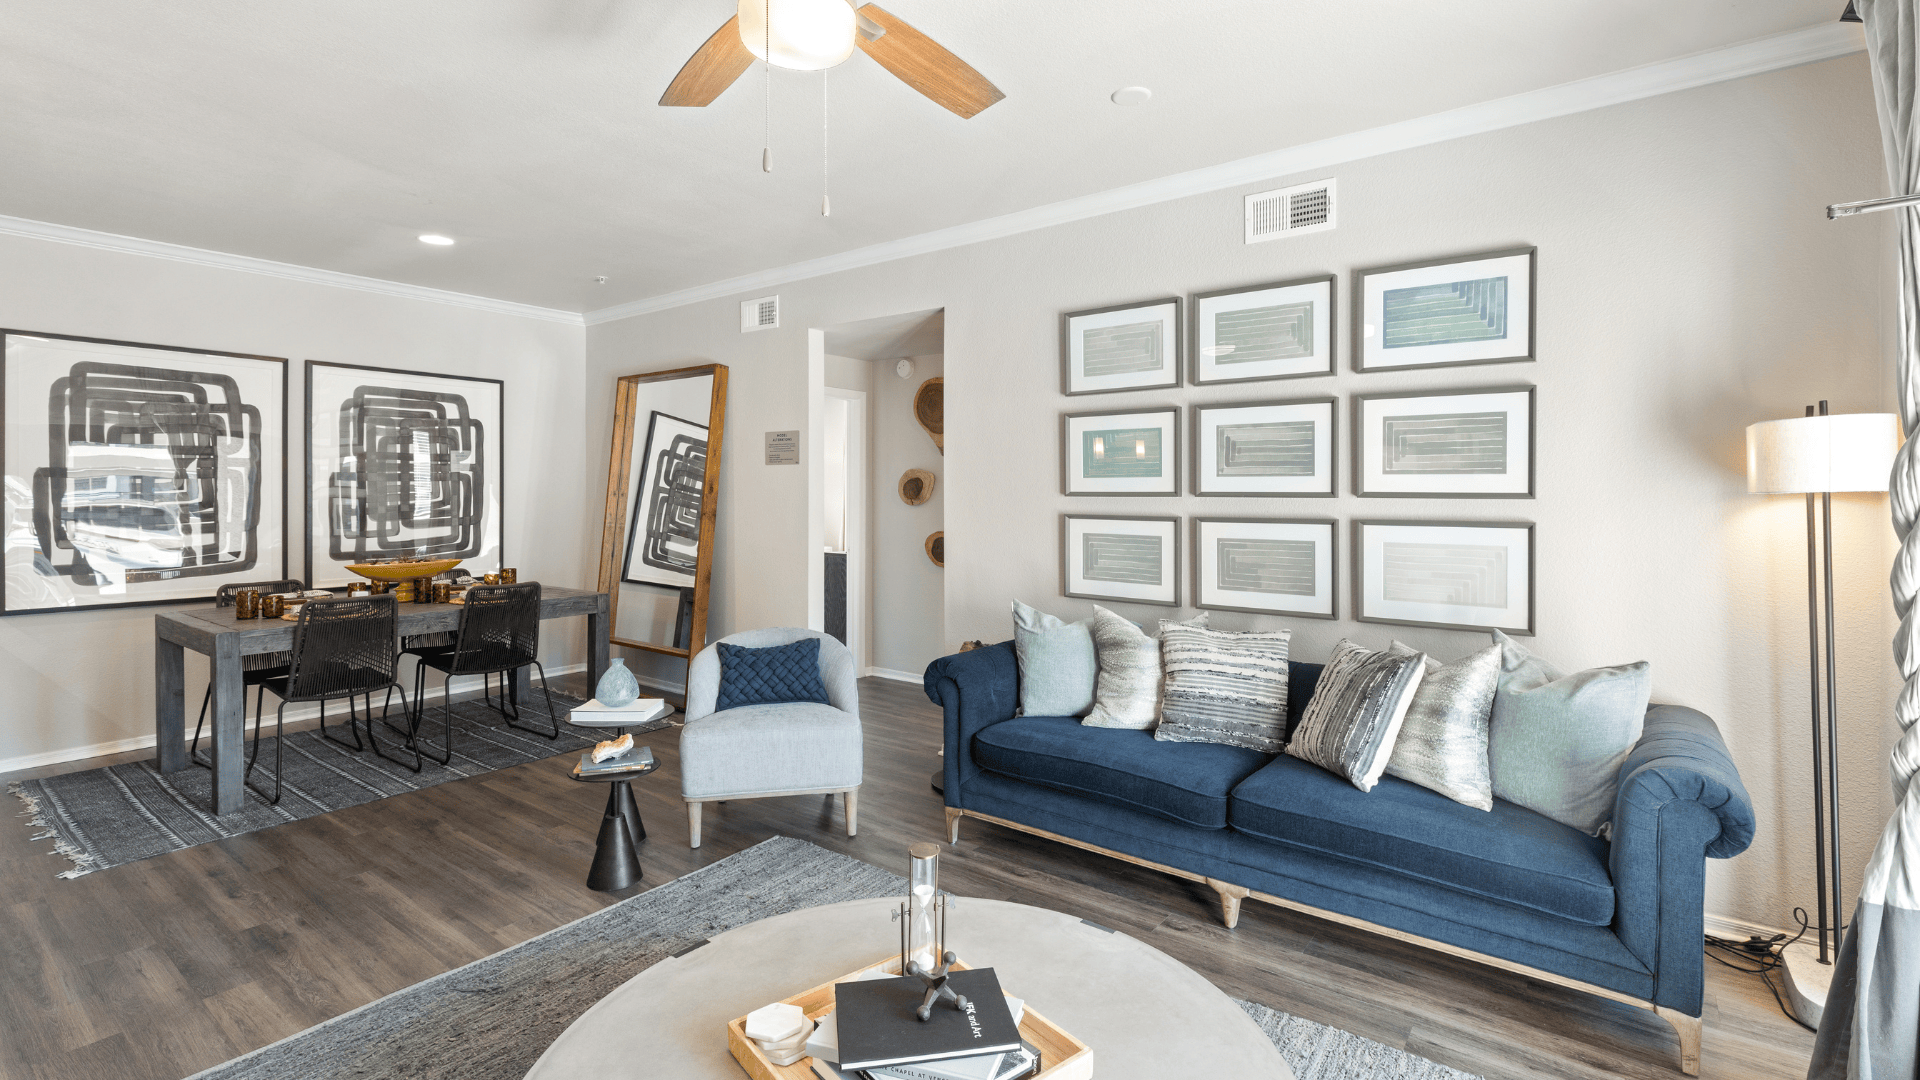 Charming Living Room with a Ceiling Fan at Our Apartments for Rent in Peoria, AZ